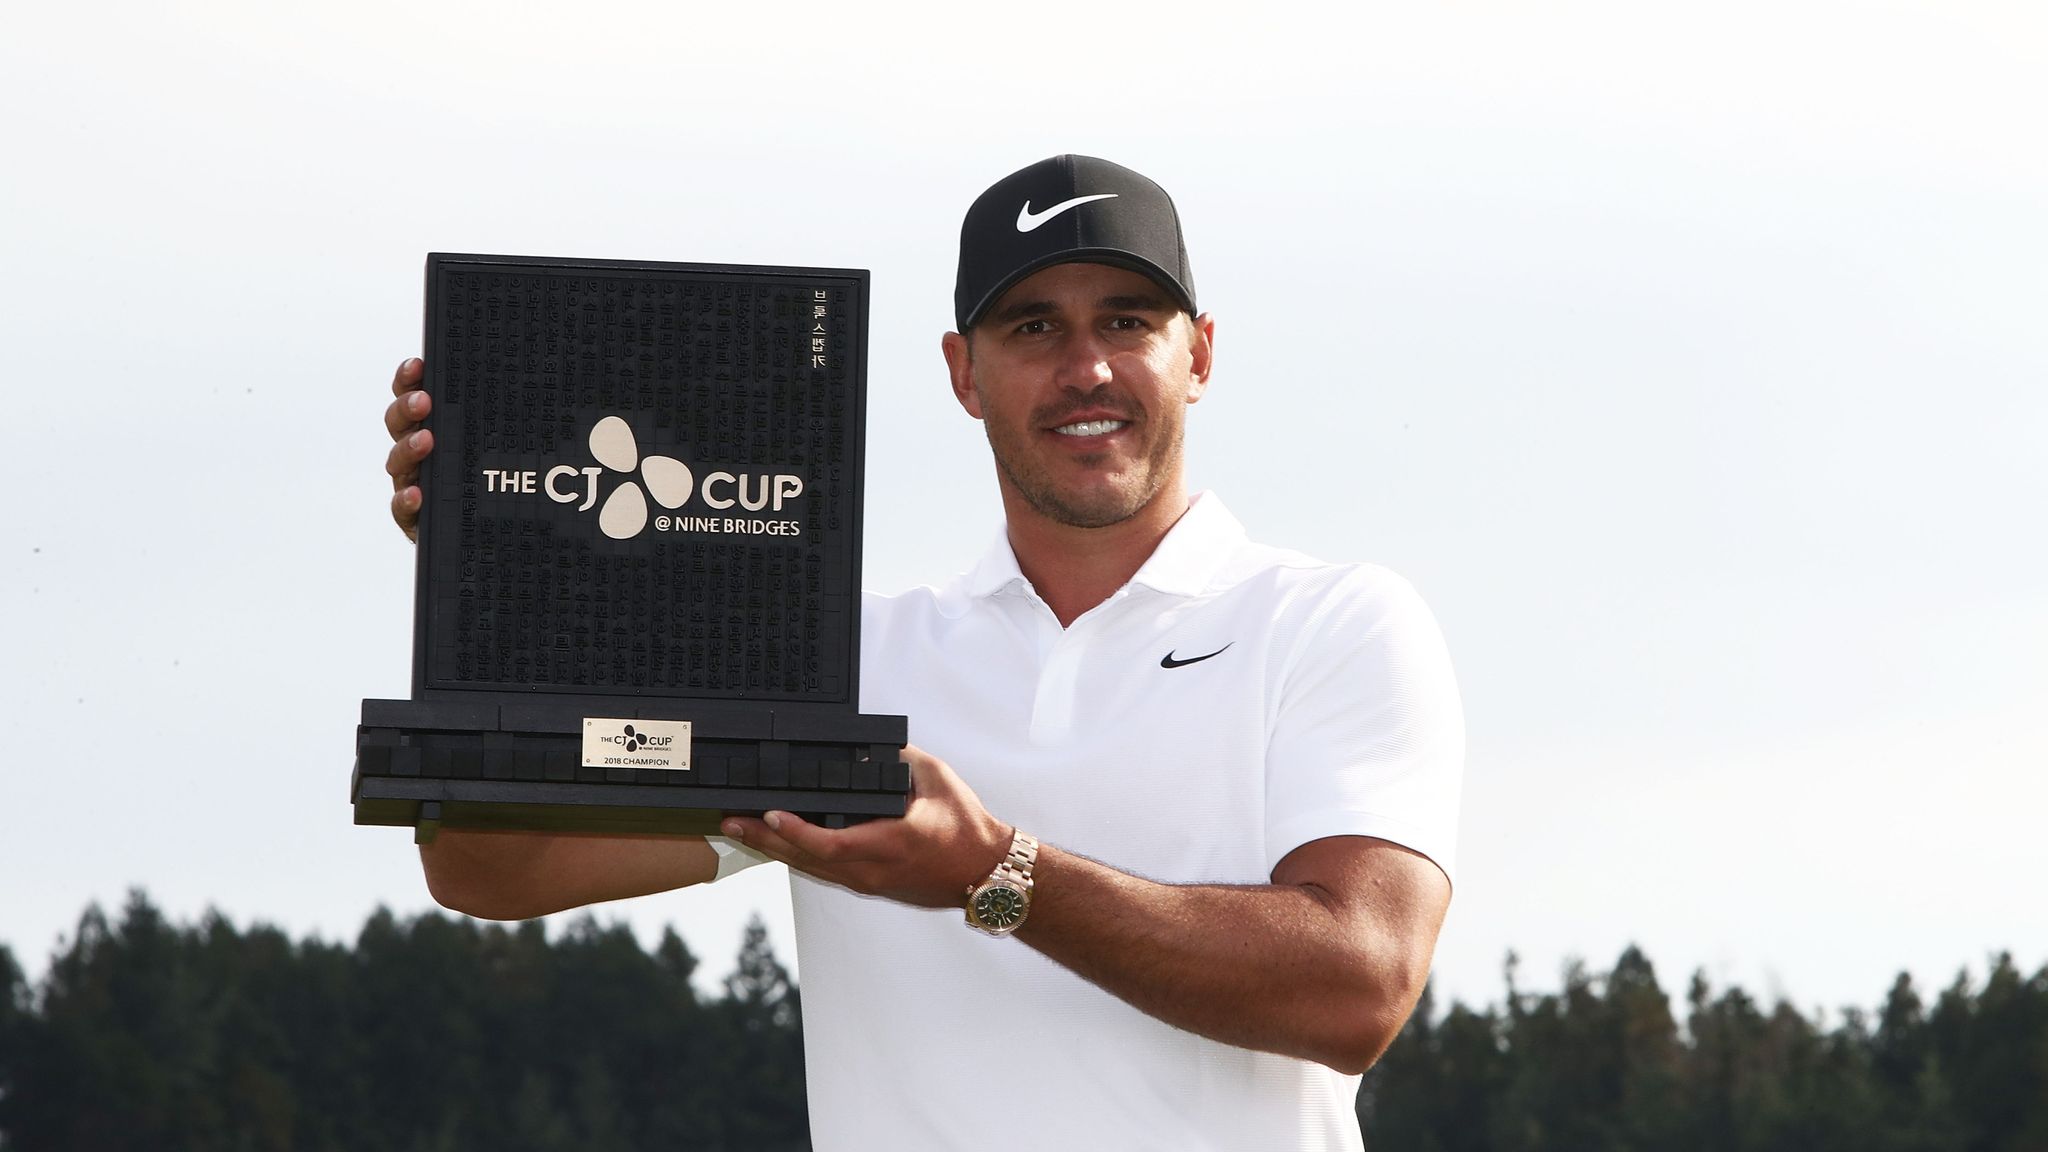 Brooks Koepka to become world No 1 for first time after CJ Cup title Golf News Sky Sports